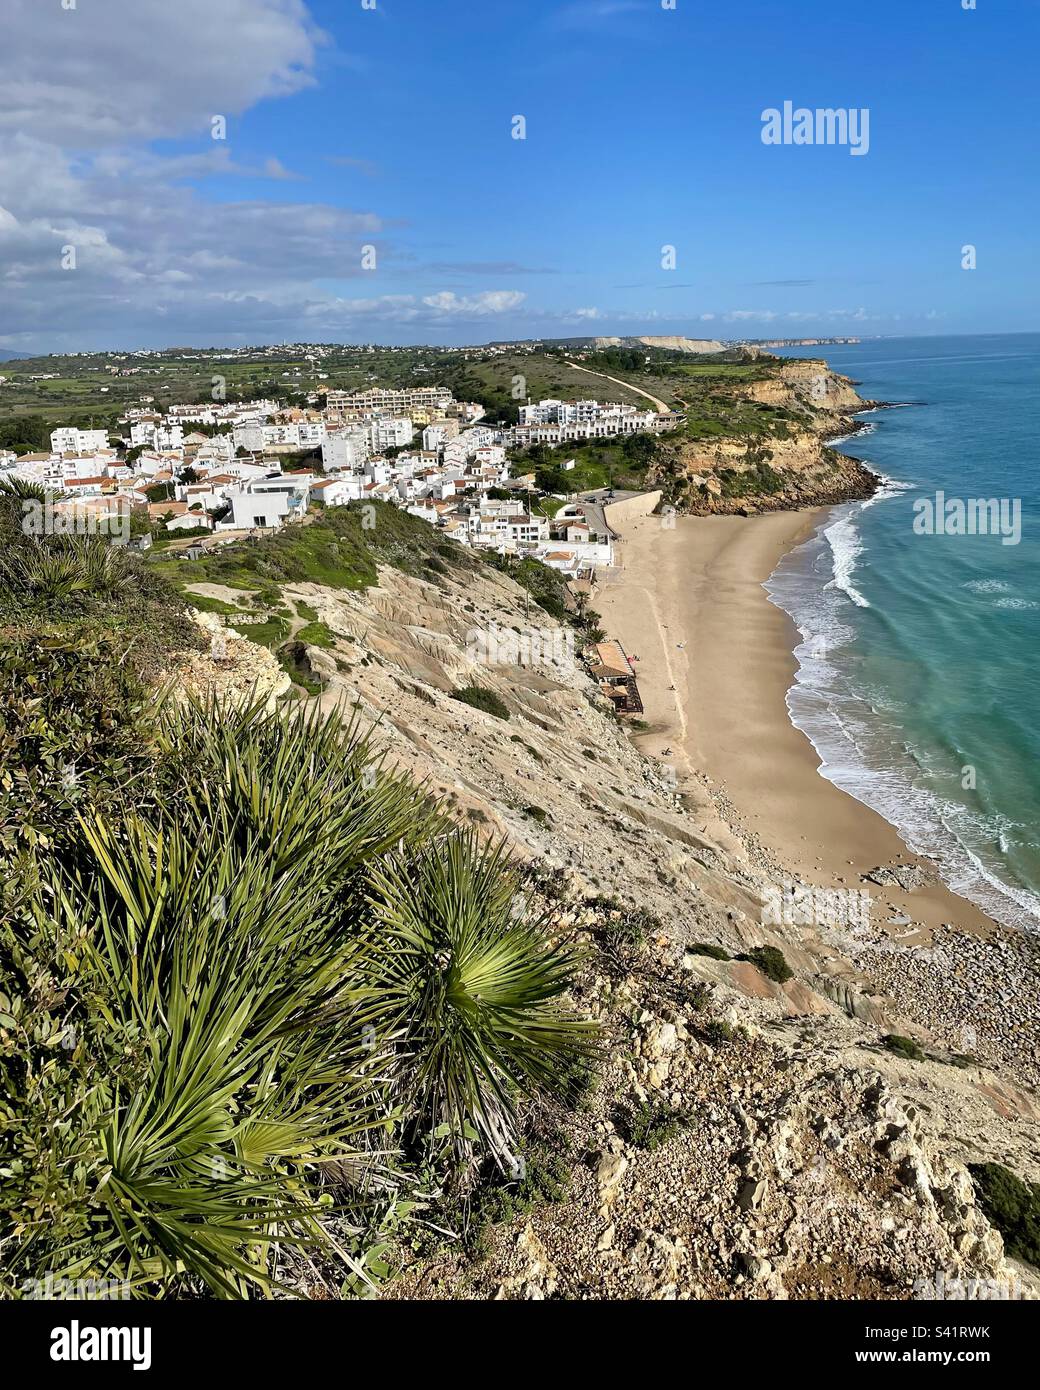 View of Burgau beach from cliffs above Stock Photo